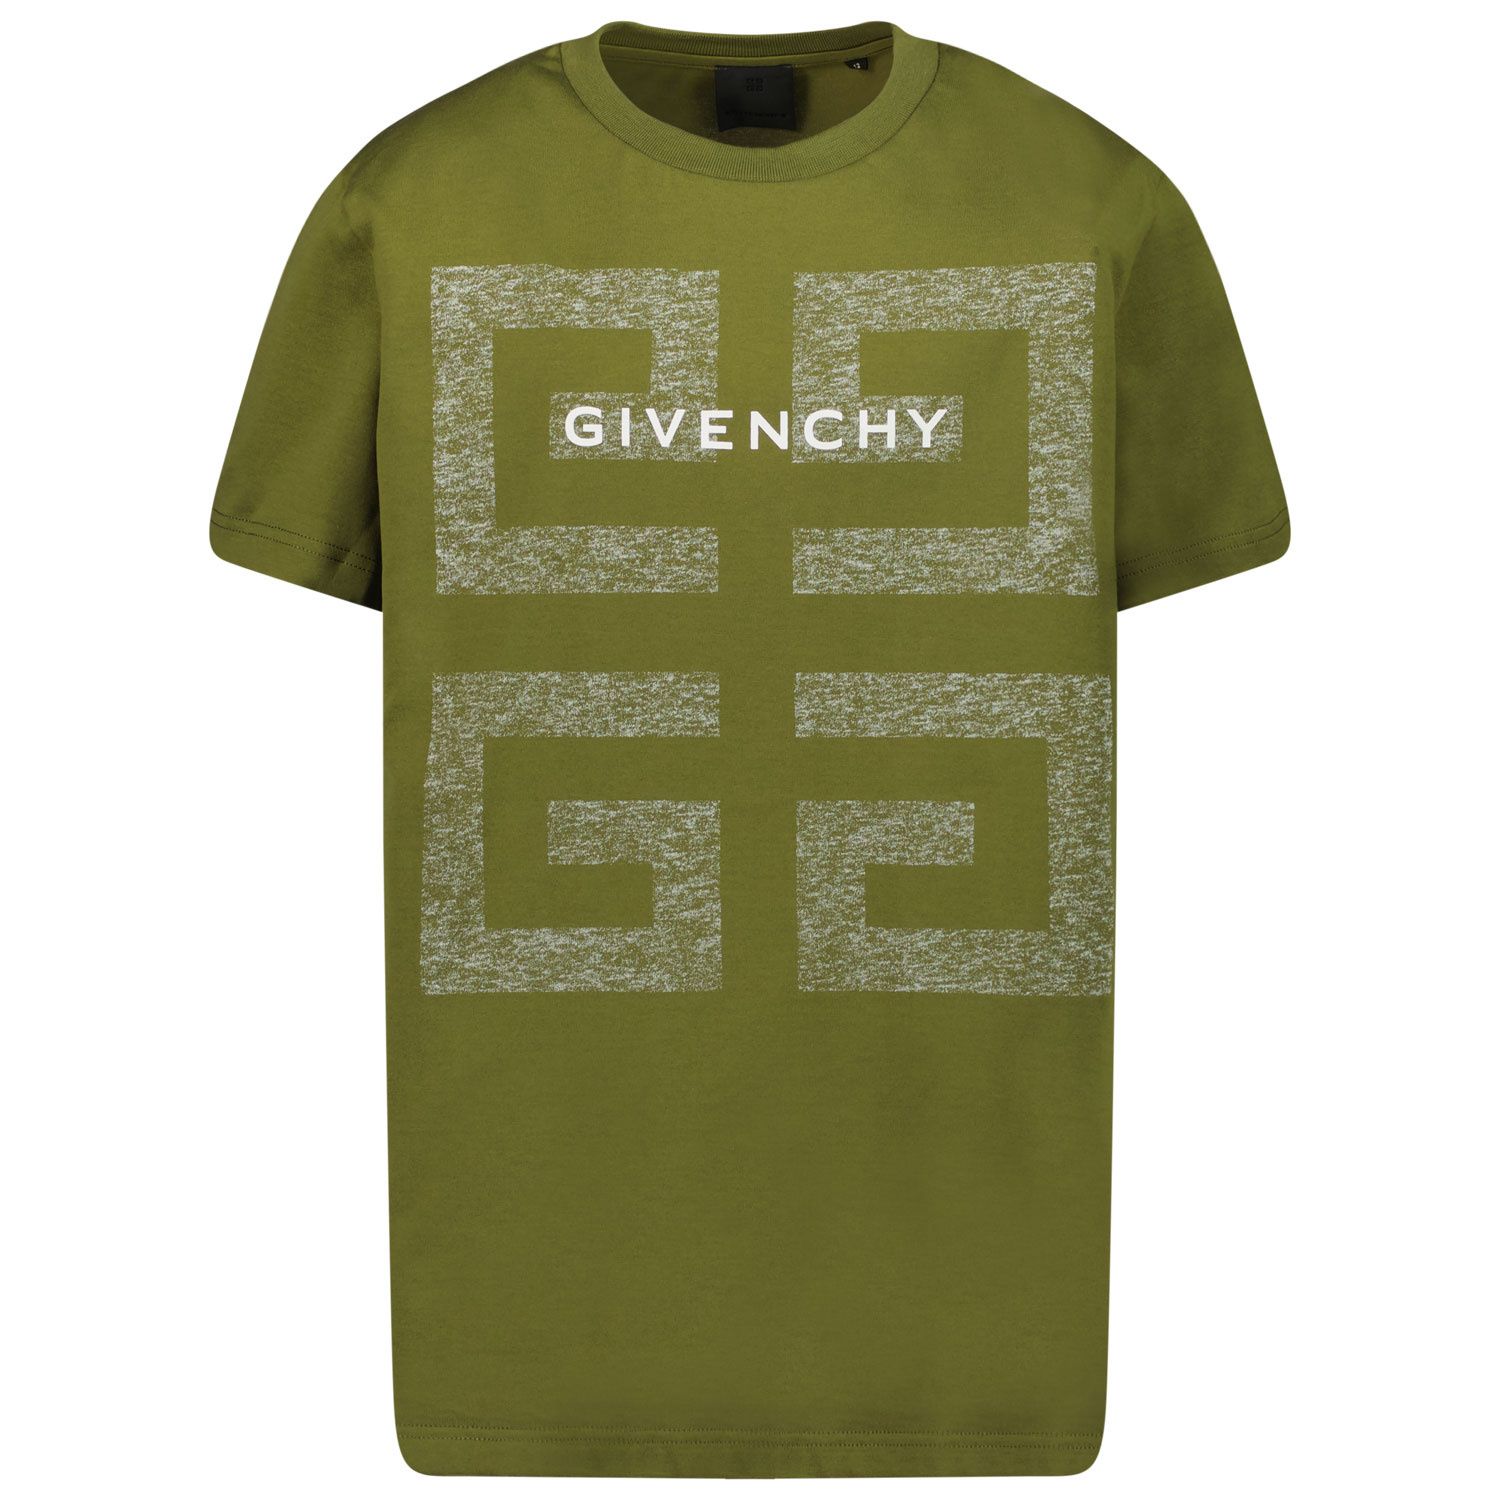 Afbeelding van Givenchy H25329 kinder t-shirt army